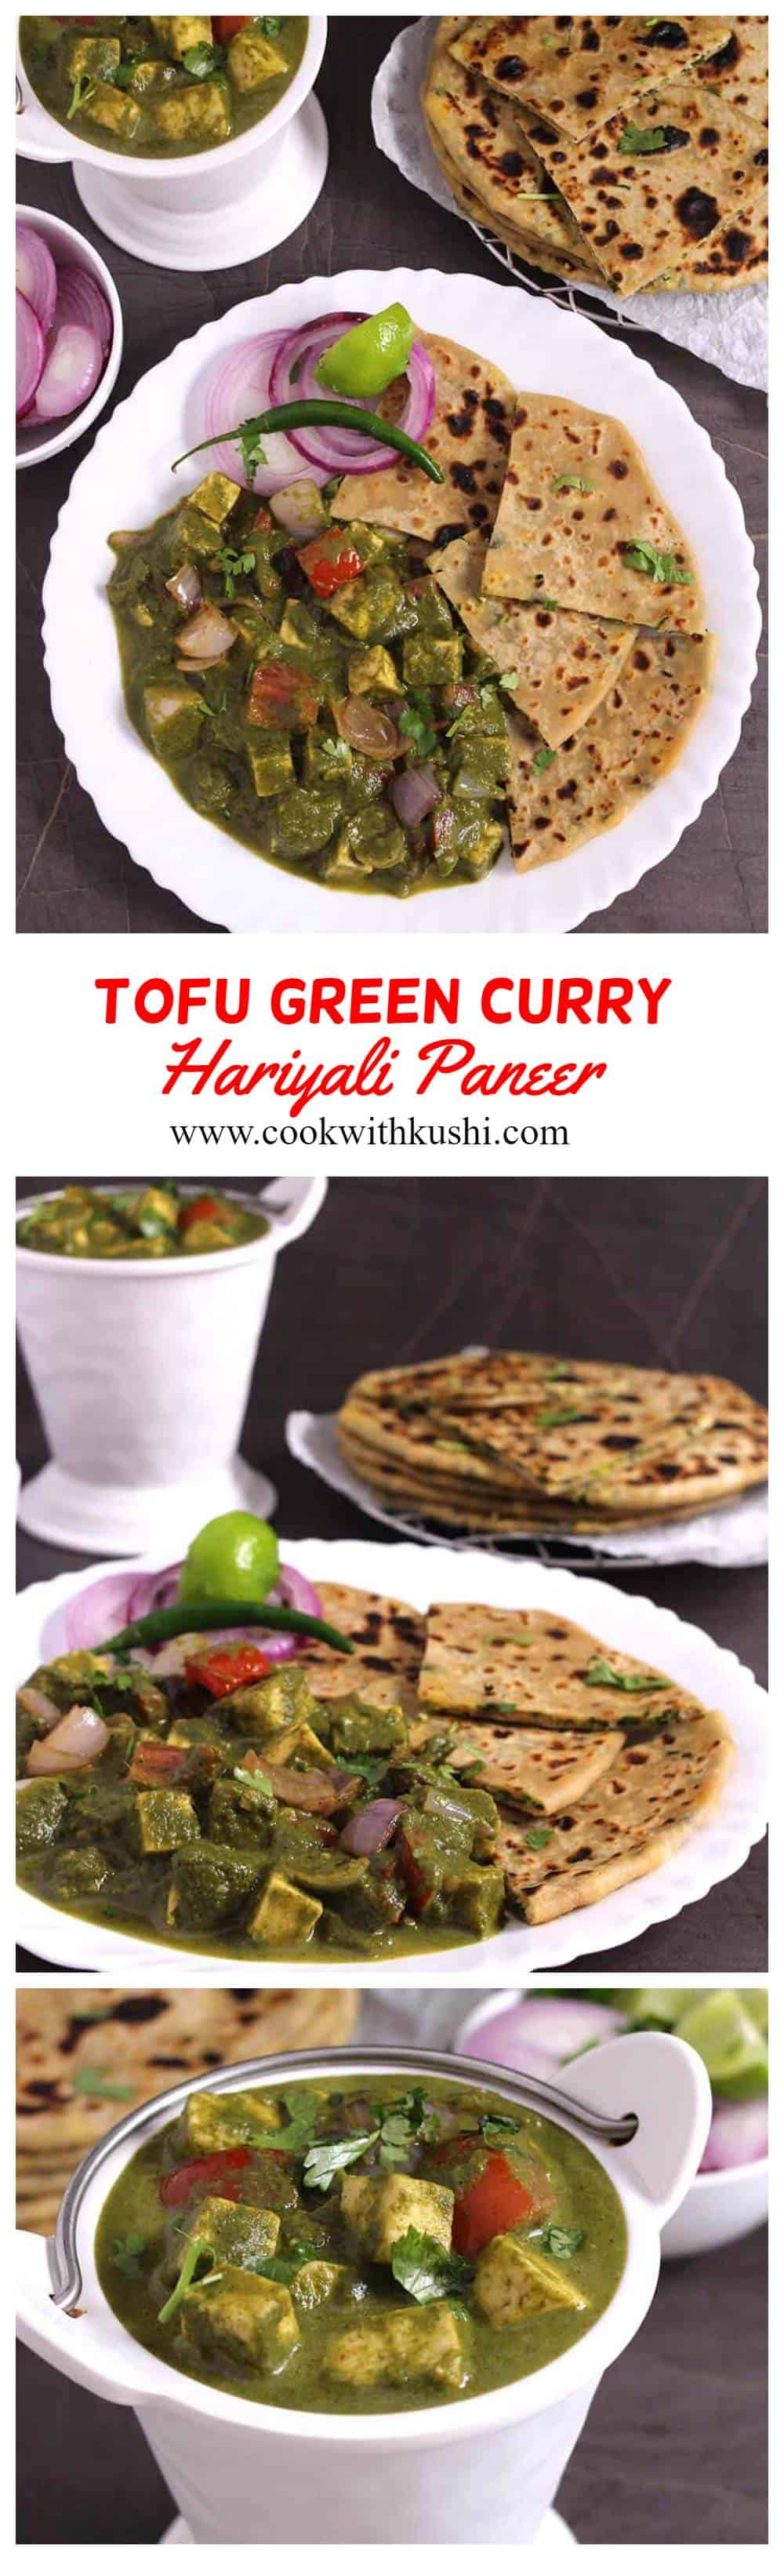  Hariyali Paneer or Tofu Green Curry  is a simple and easy-to-make curry recipe packed full of flavor prepared using paneer (Indian cottage cheese) or tofu and few basic ingredients from your kitchen. #paneer #indianfood #indianrecipes #indiancurry #pudinapaneer #tofu #extrafirmtofu #dinnerrecipes #Lunchrecipes #vegetarianmeal #vegandinner #restaurantstyle #dhabastyle #paneercurry #simplerecipes #instantpotpaneer